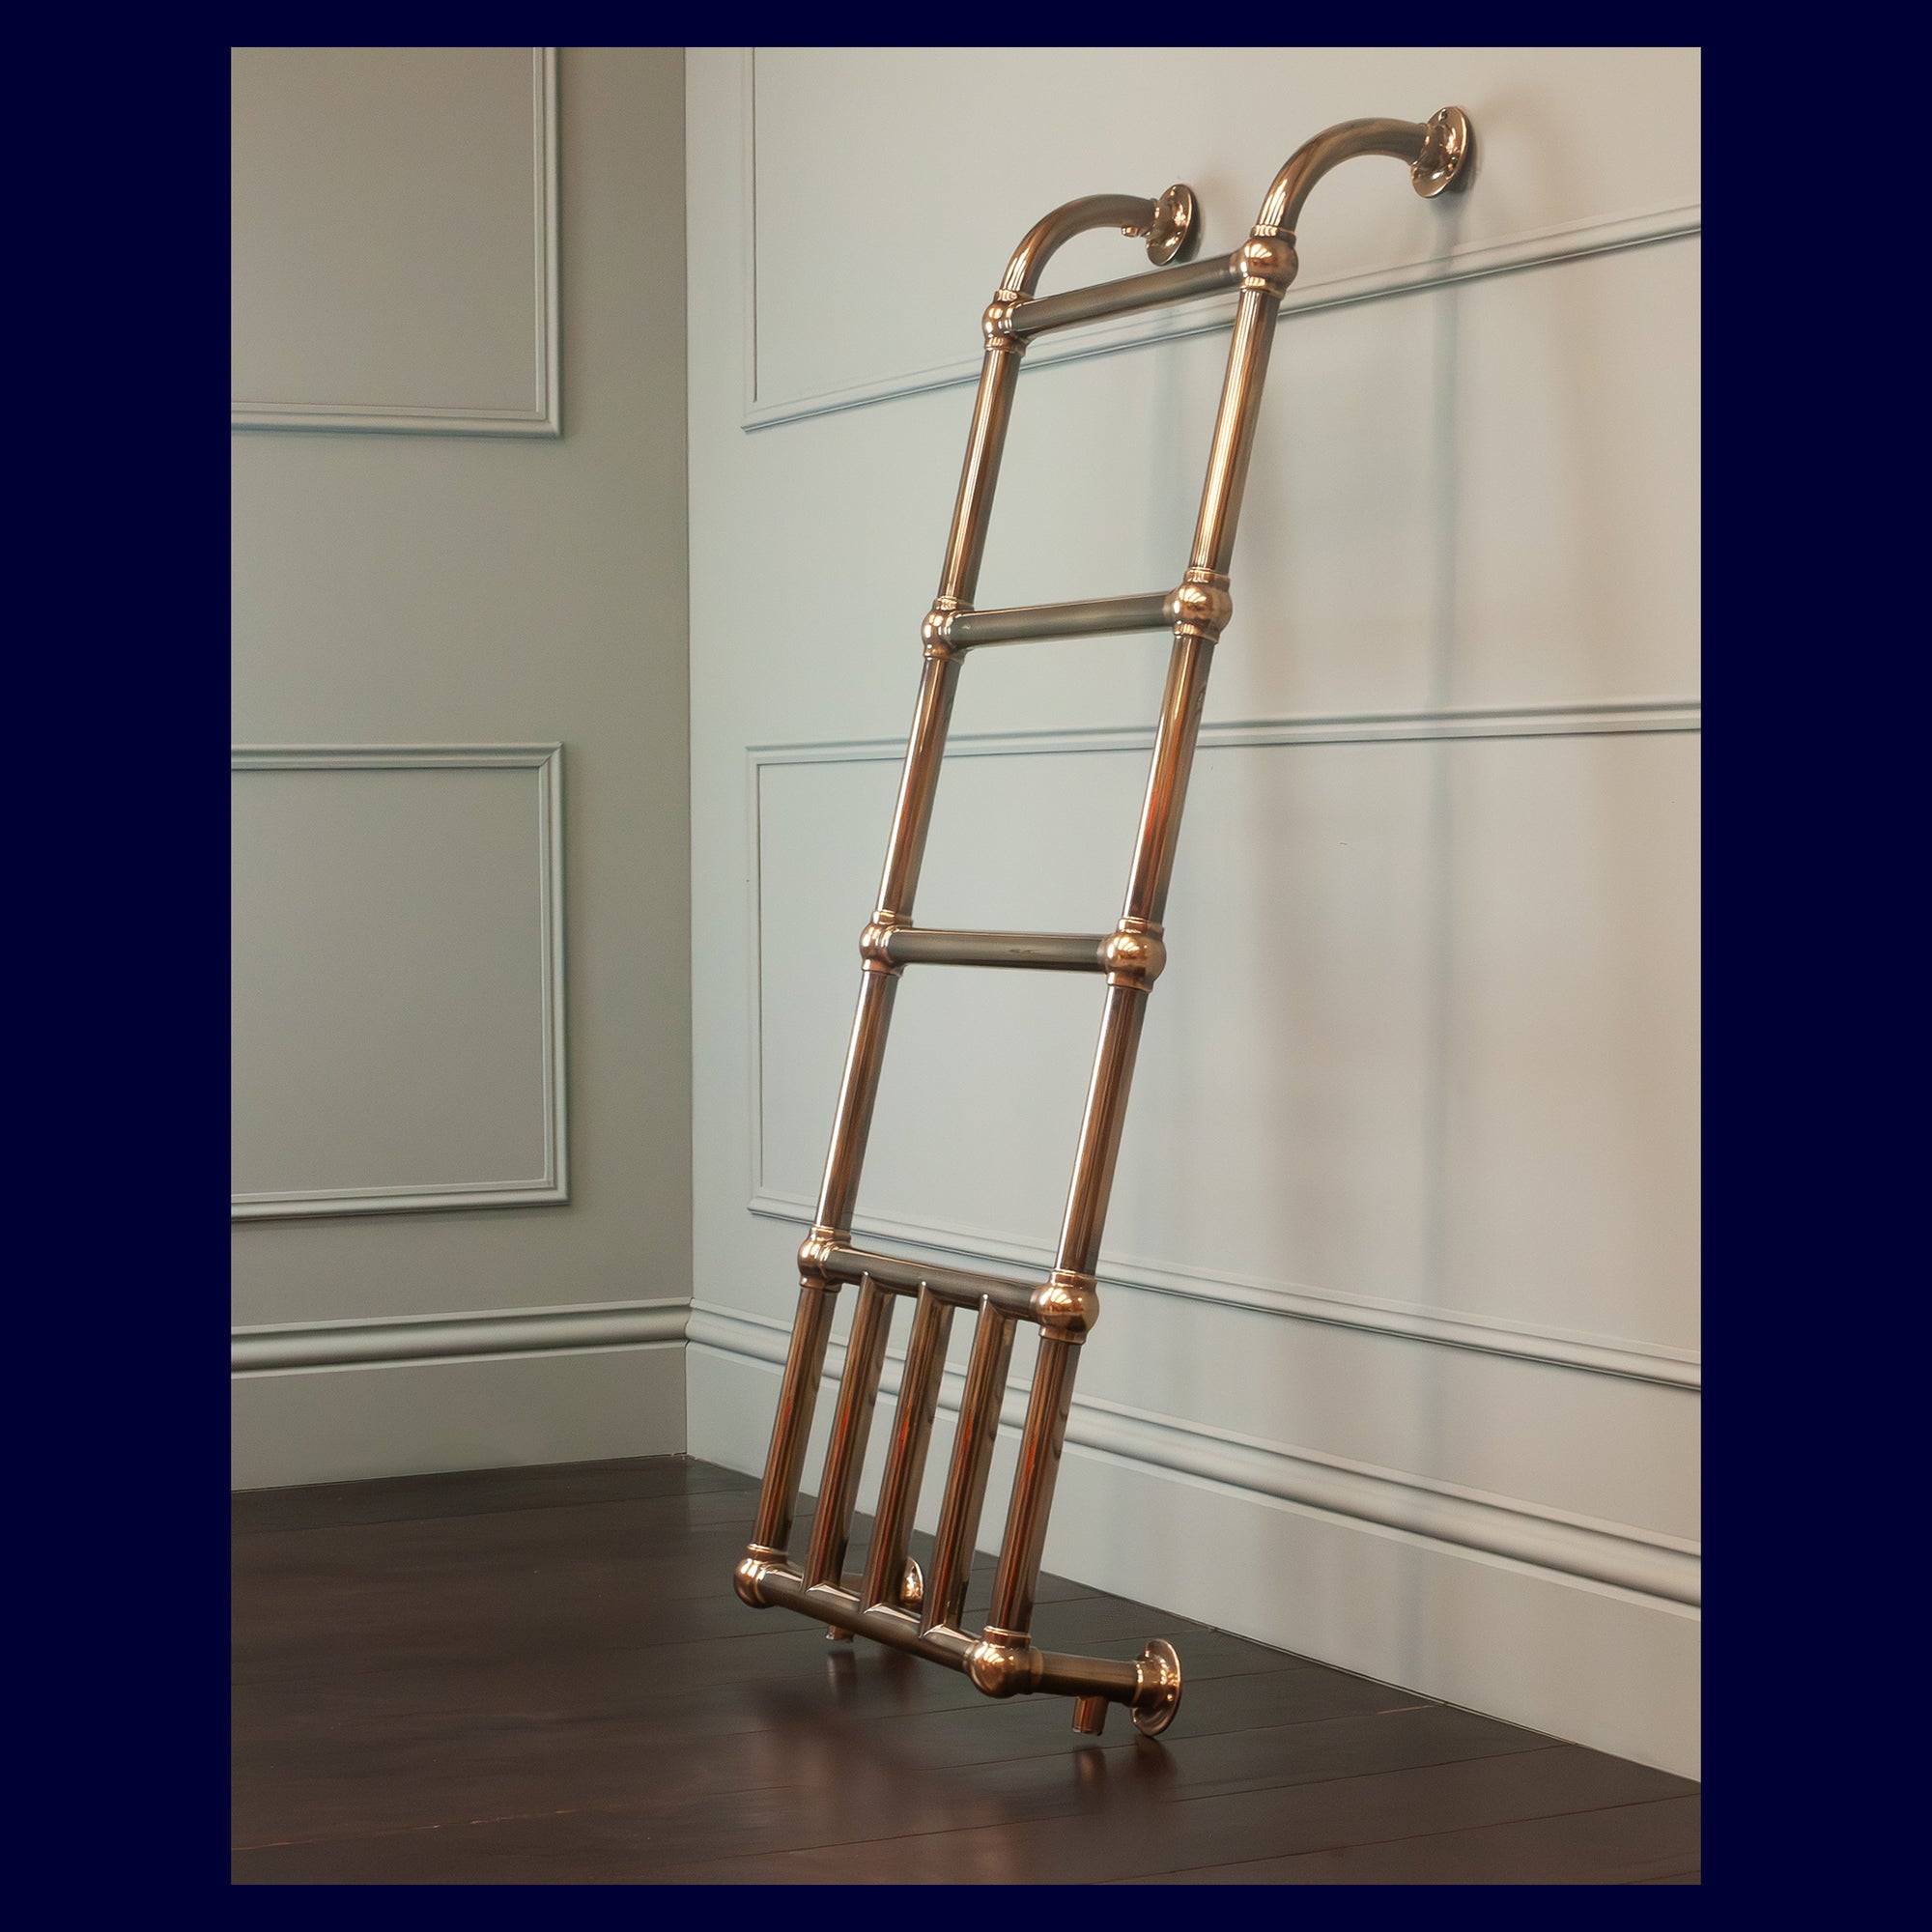 Ex-Display Oxford Heated Towel Rail - 1290 x 500 - Central Heating Only - Aged Brass - Rutland London